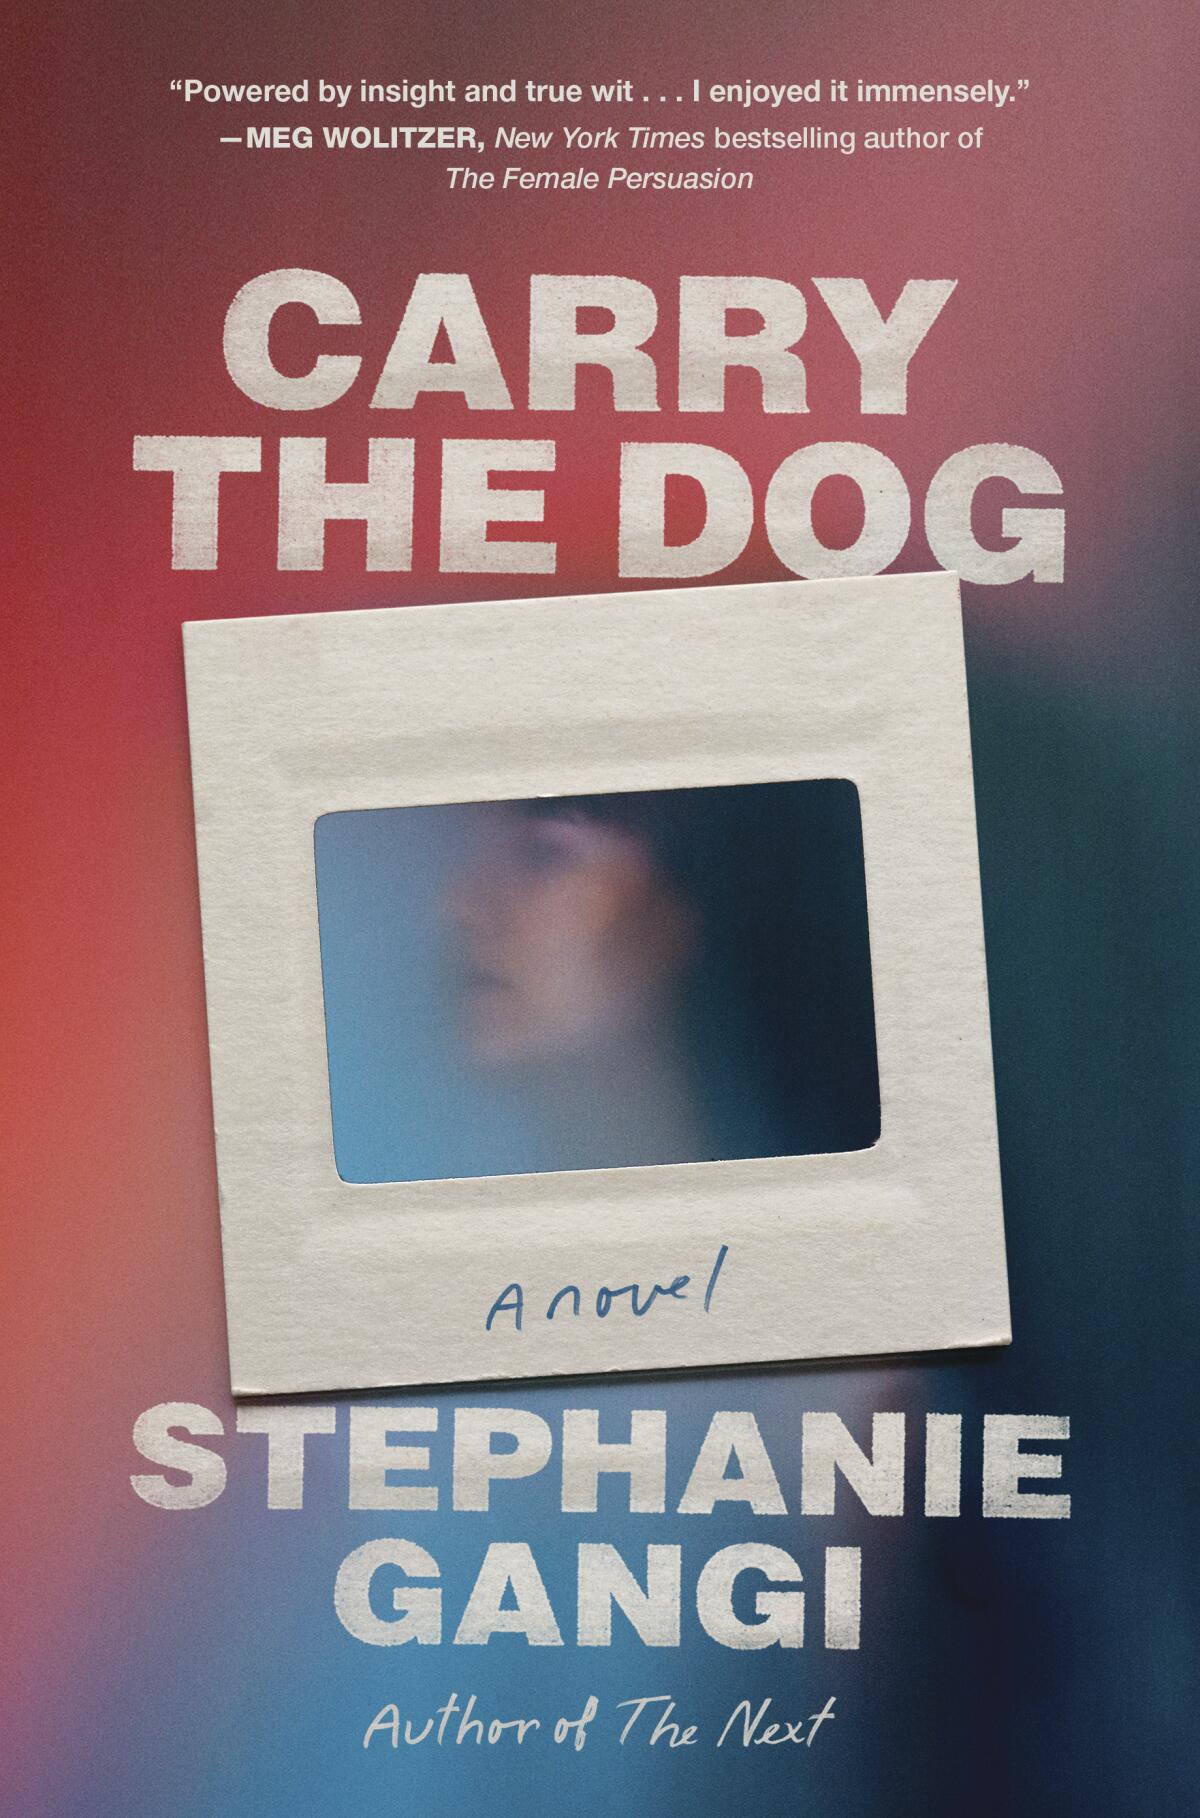 Book cover for "Carry the Dog"